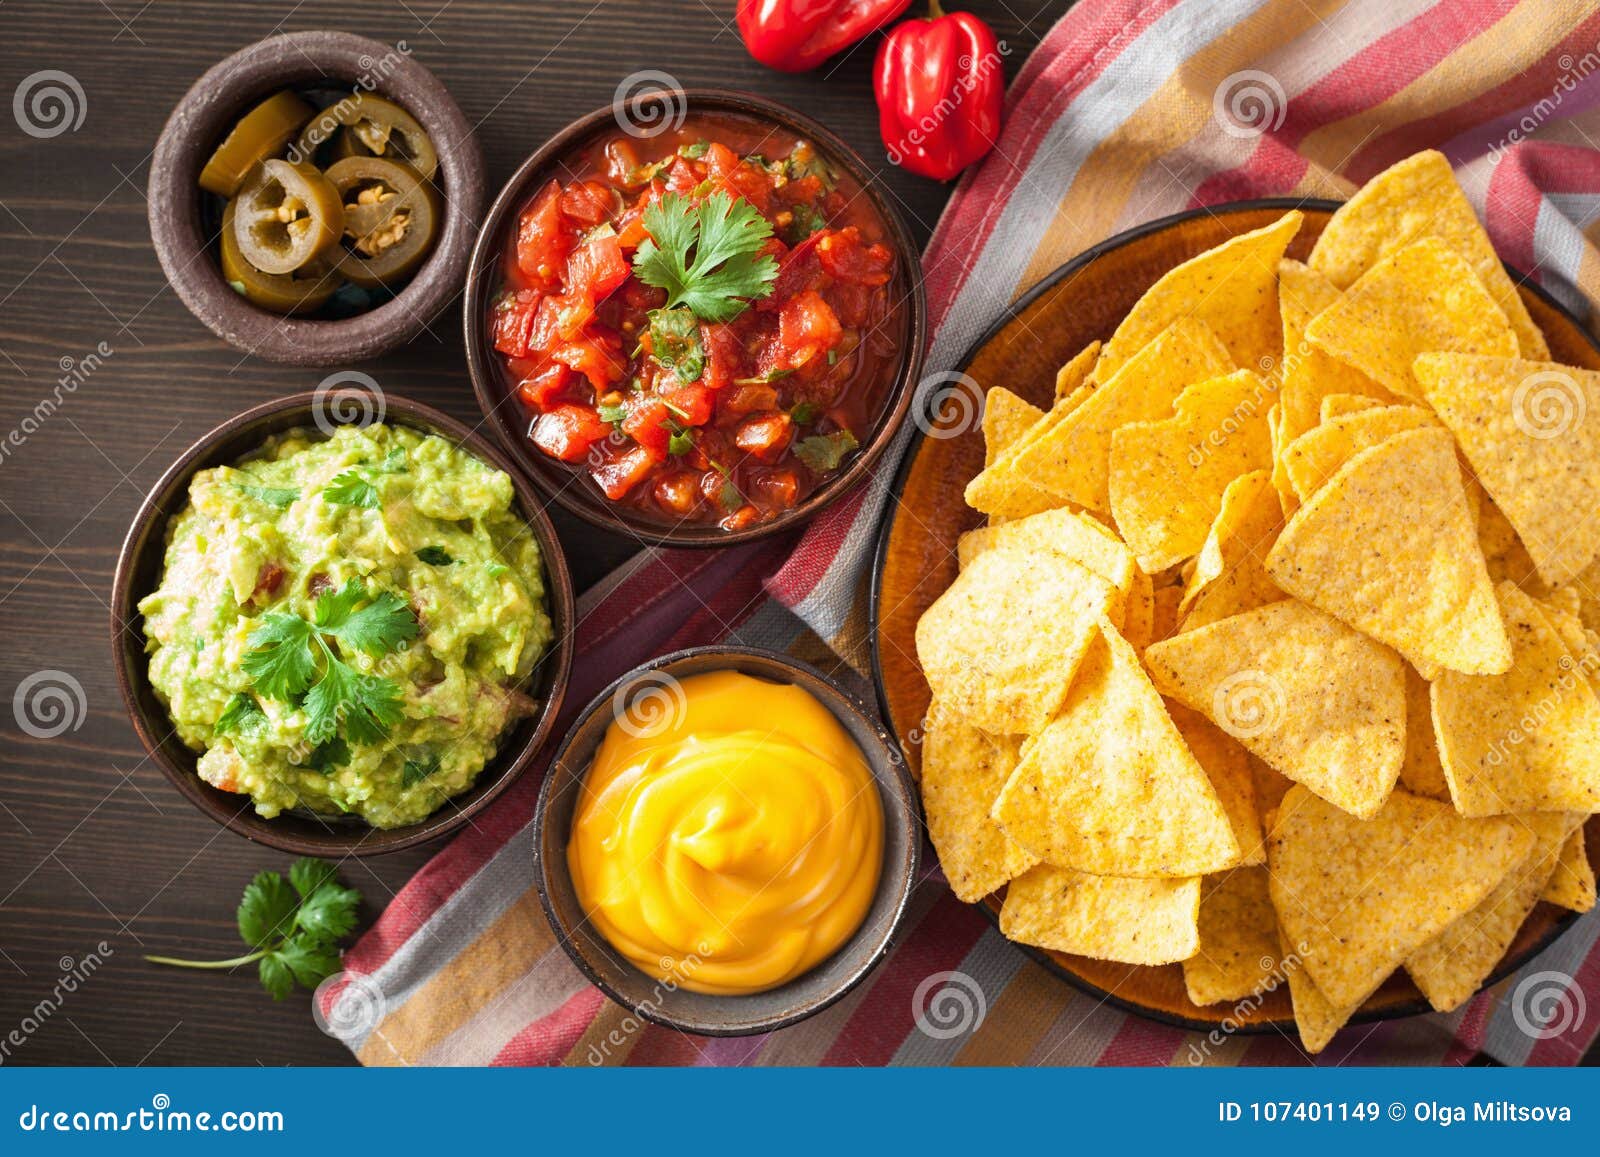 mexican nachos tortilla chips with guacamole, salsa and cheese d